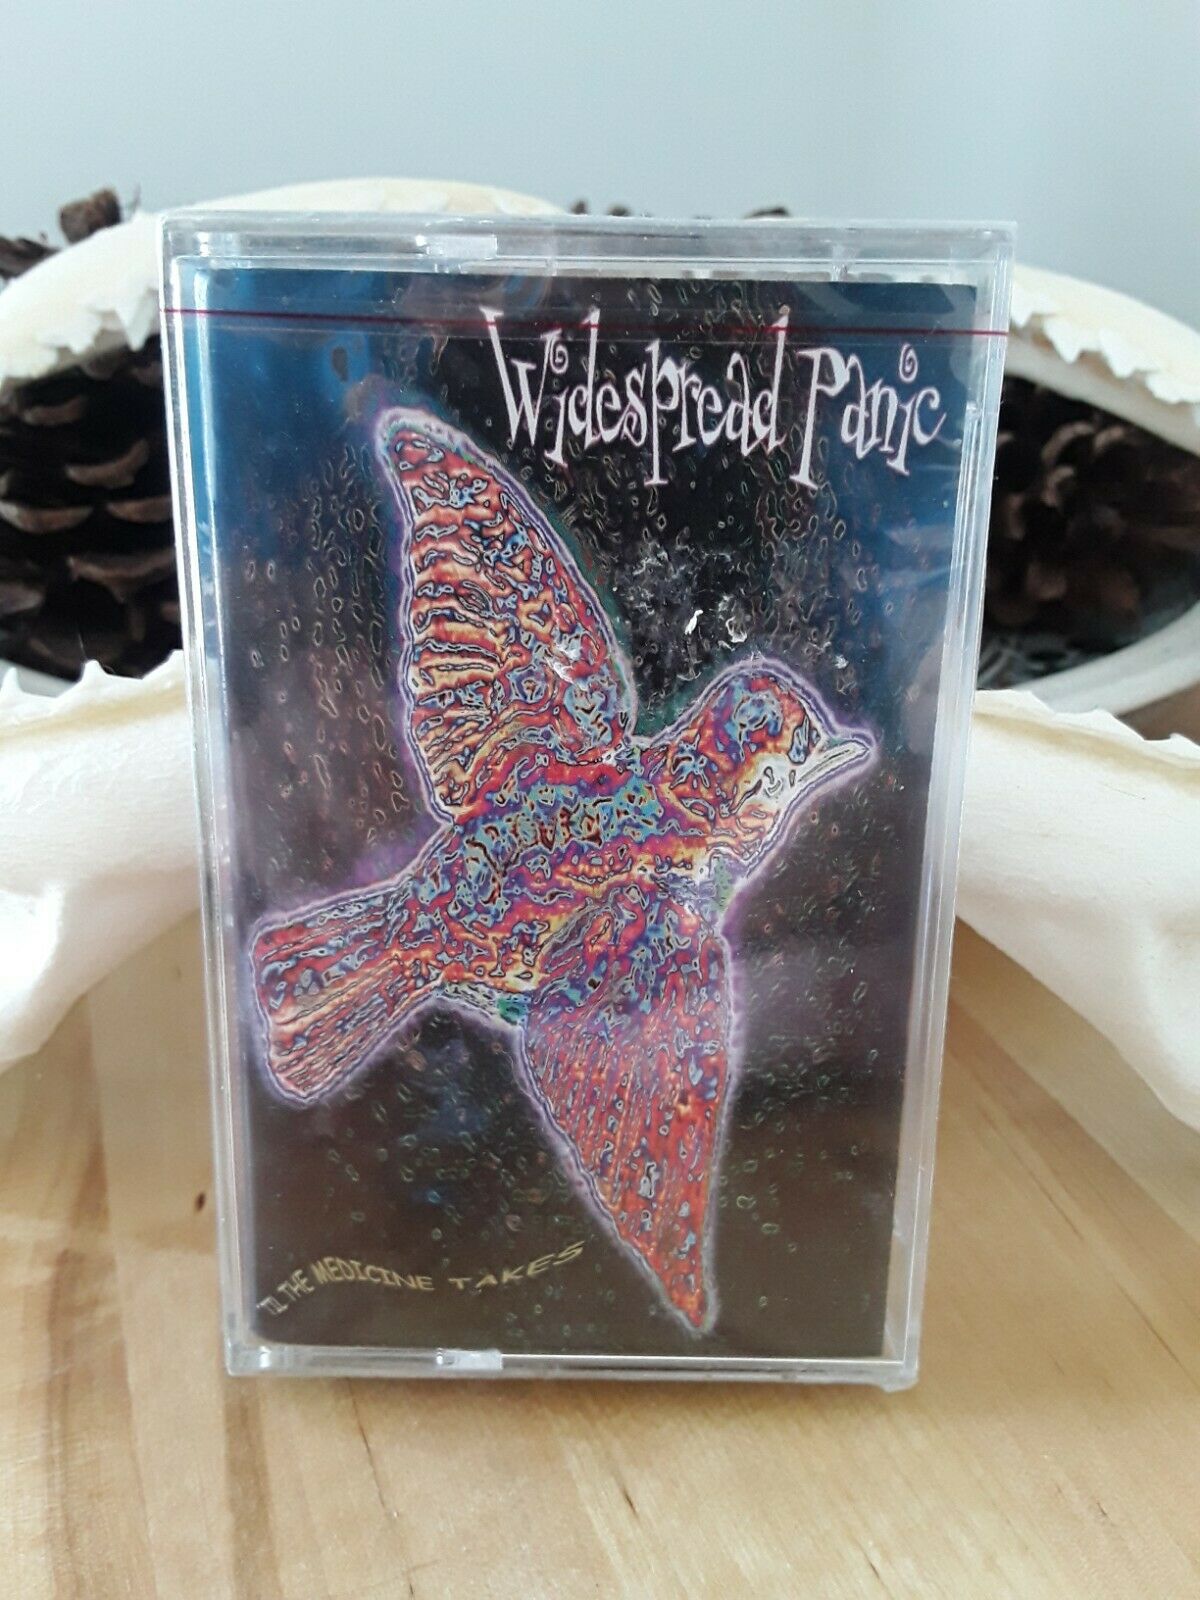 Widespread Panic Til The Medicine Takes Cassette Tape - Brand New